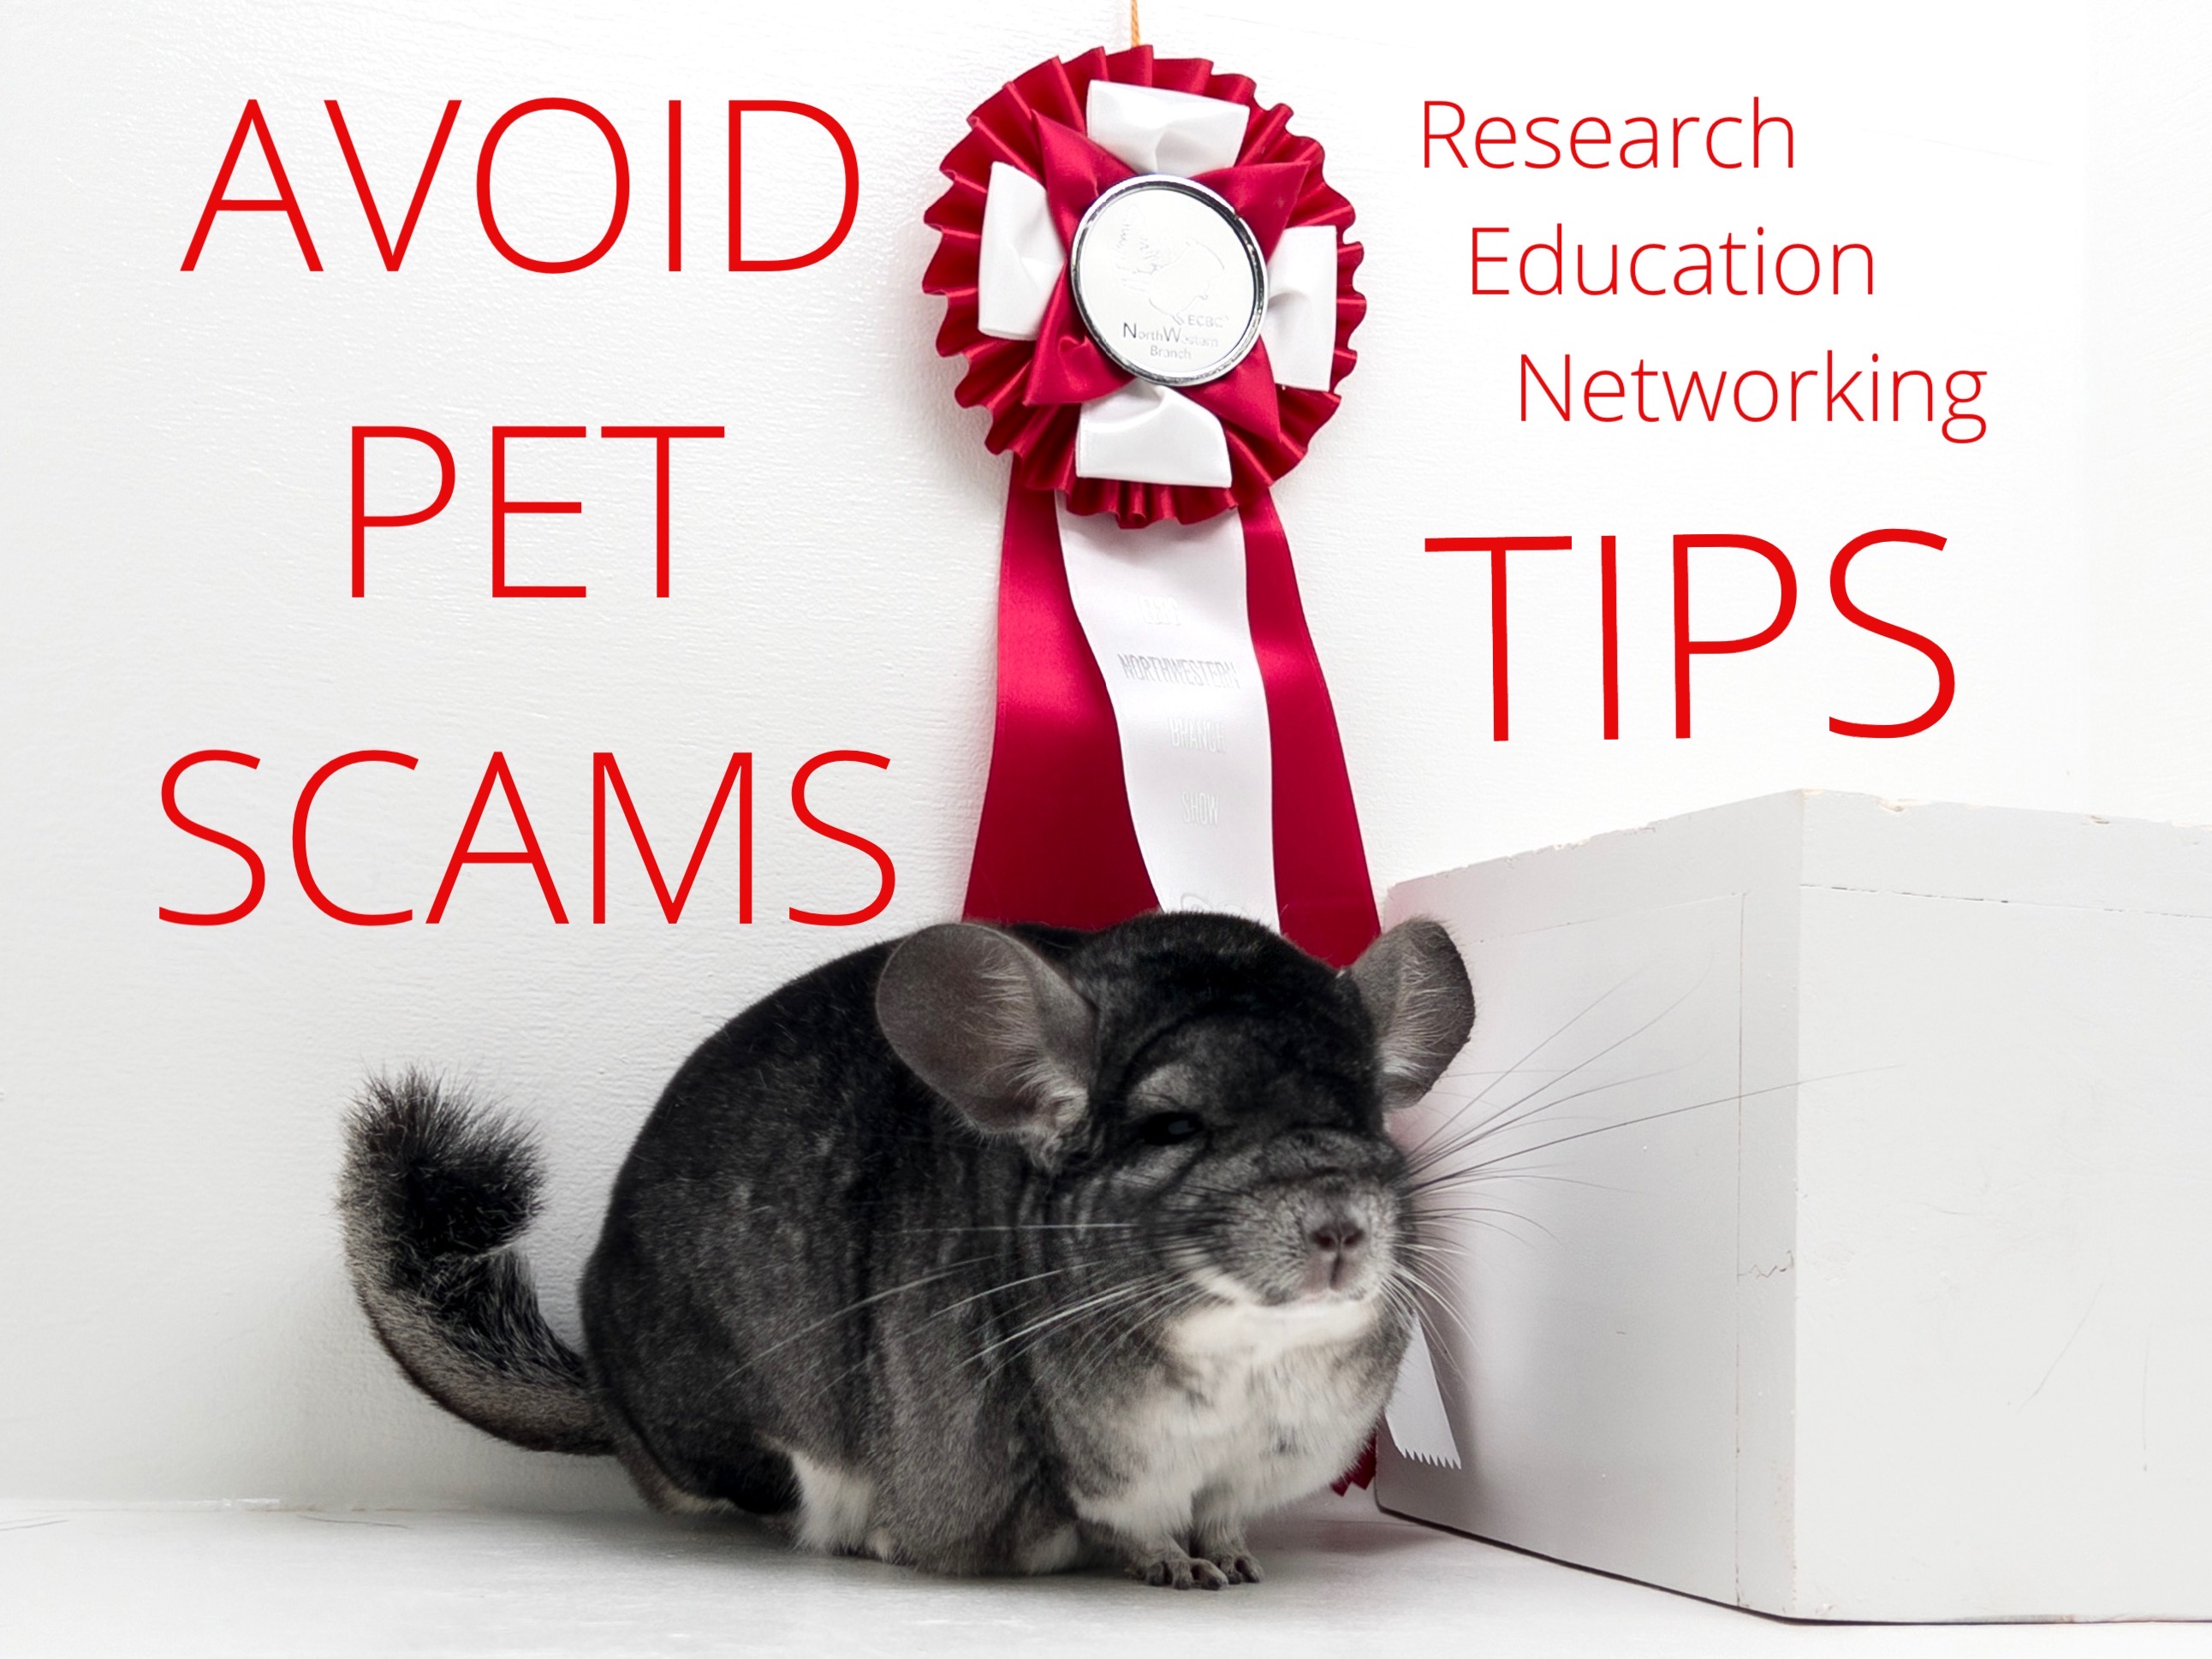 Key signs of pet scams for safe adoptions